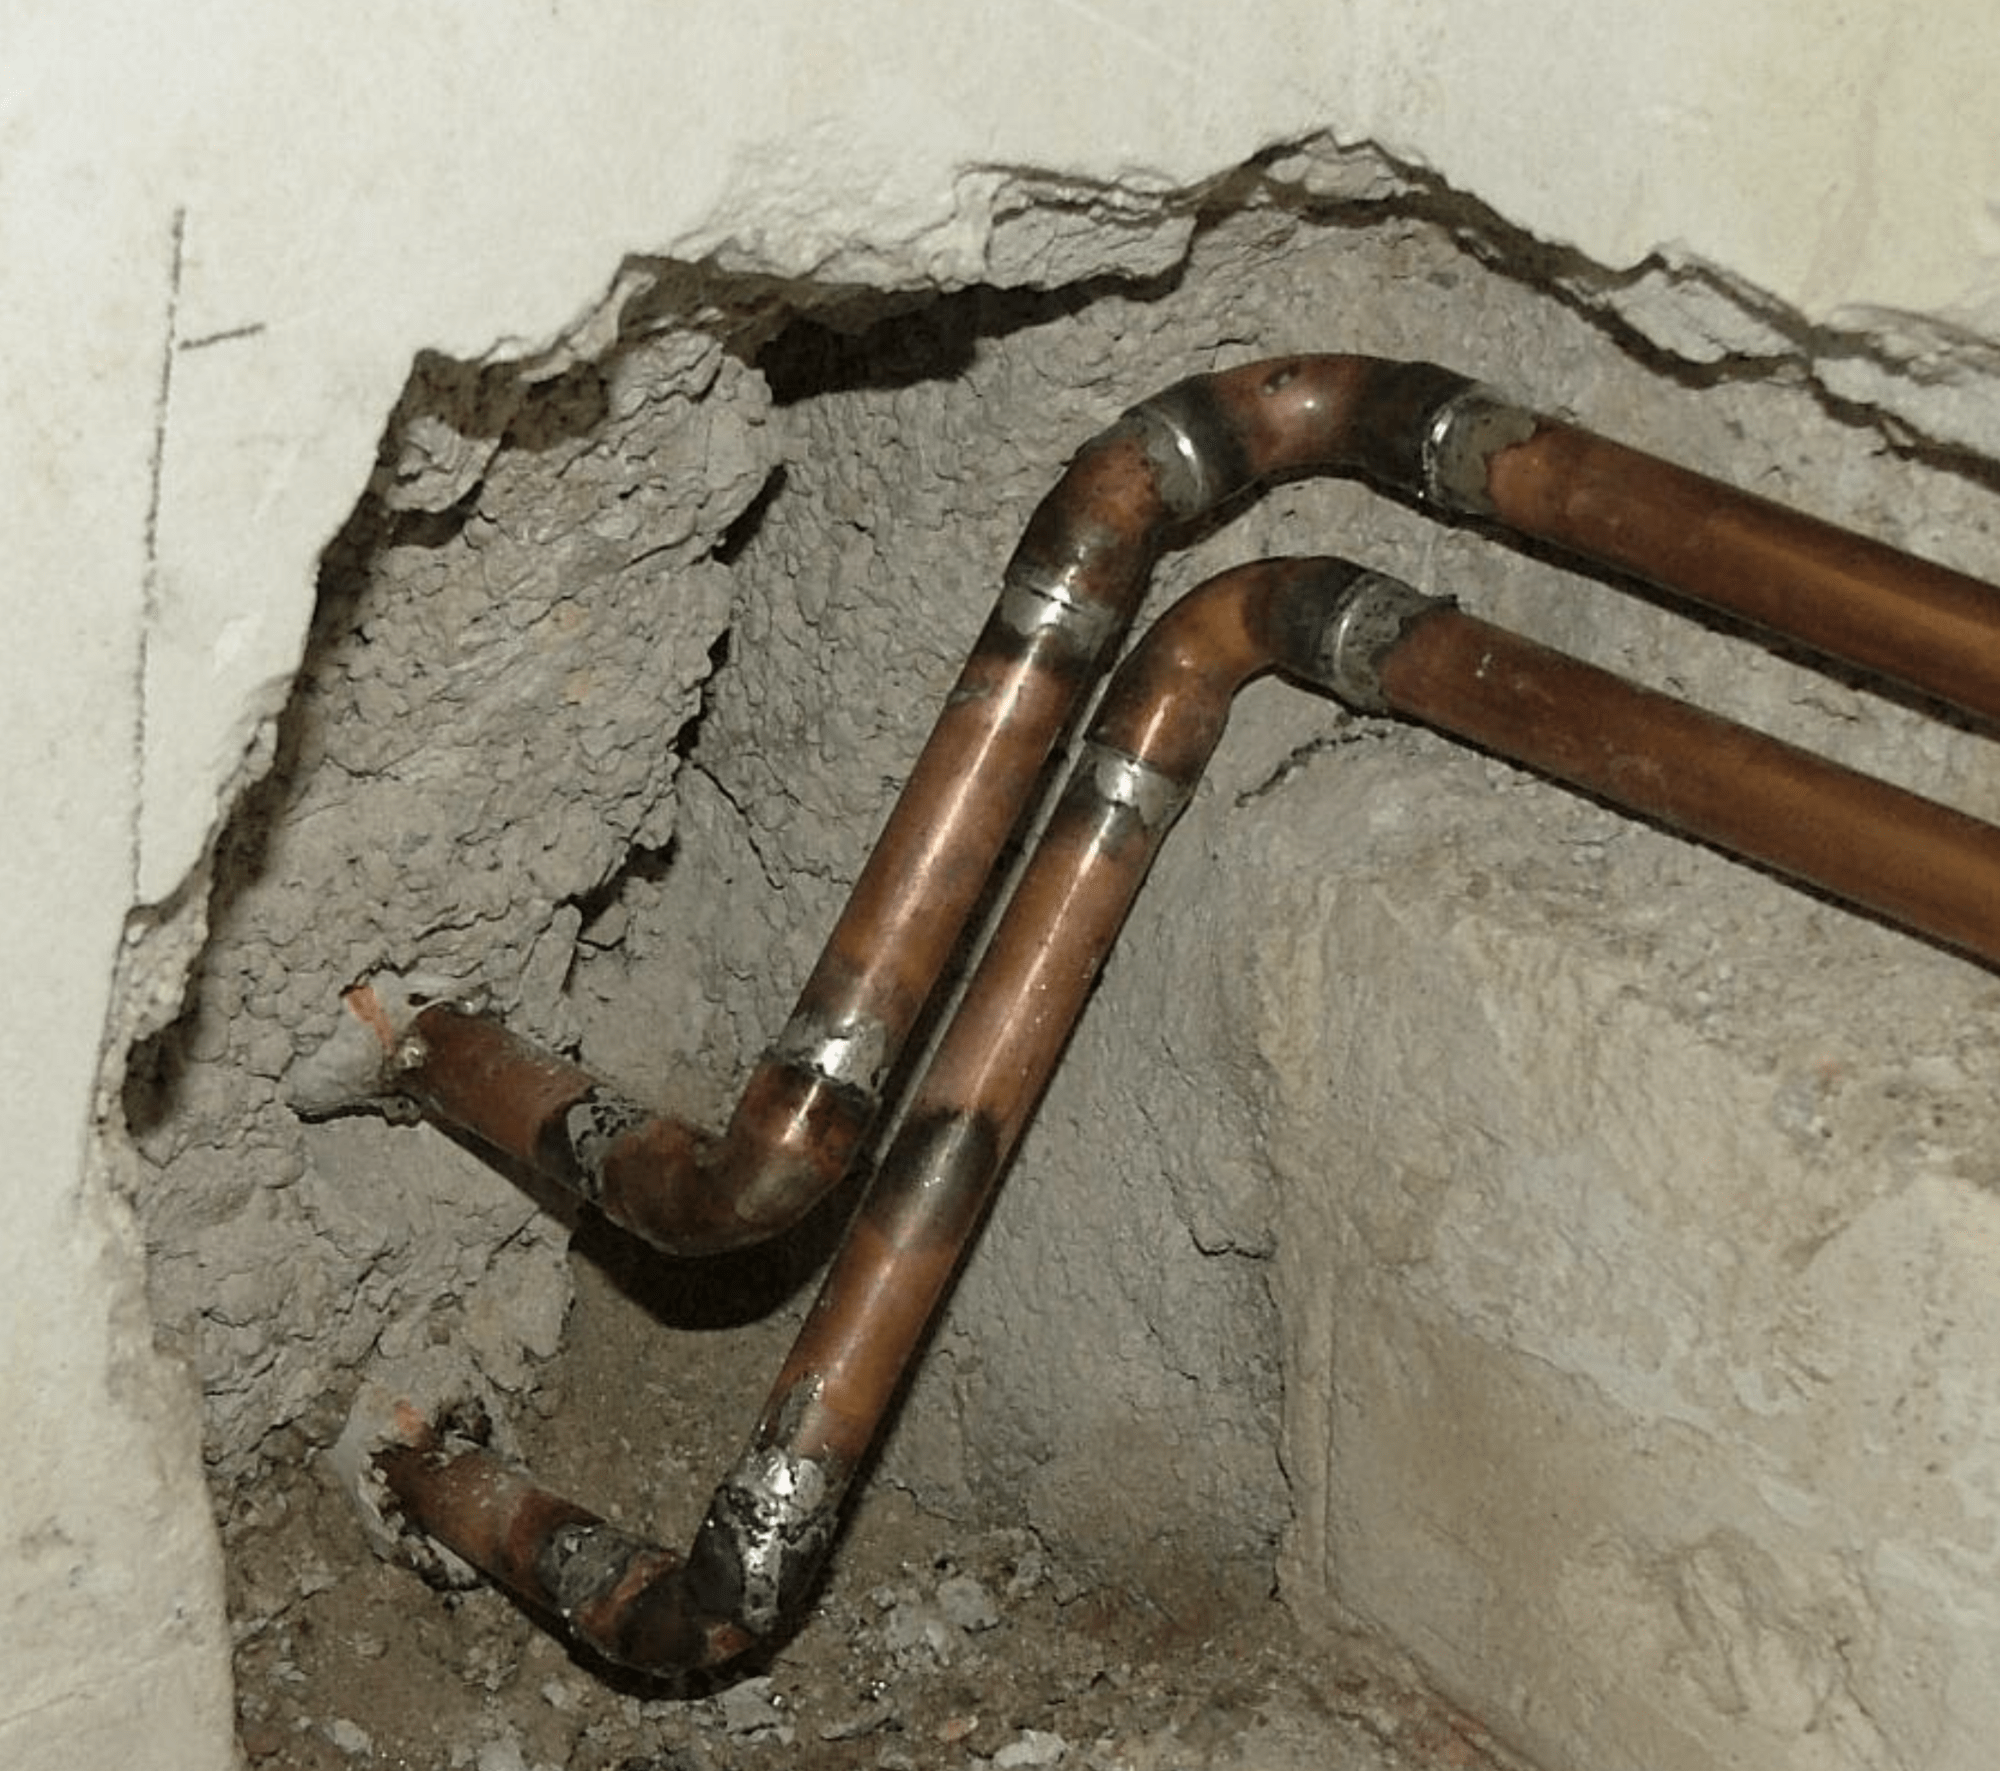 copper pipes with lead solder running along concrete wall